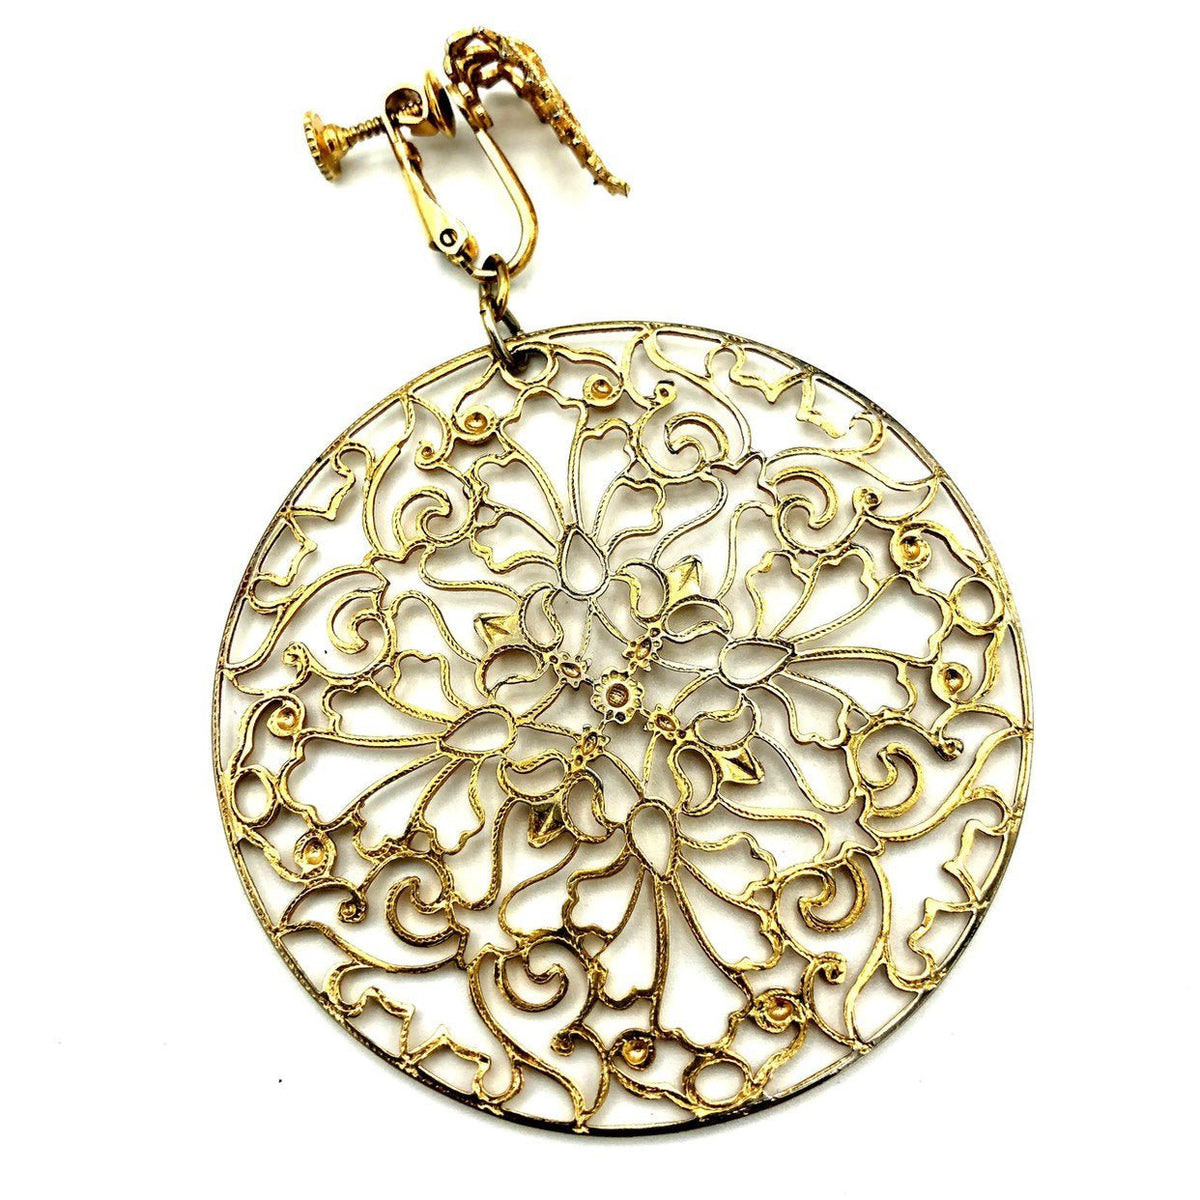 Napier Gold Circle Floral Filigree Style Vintage Clip-On Earrings - 24 Wishes Vintage Jewelry